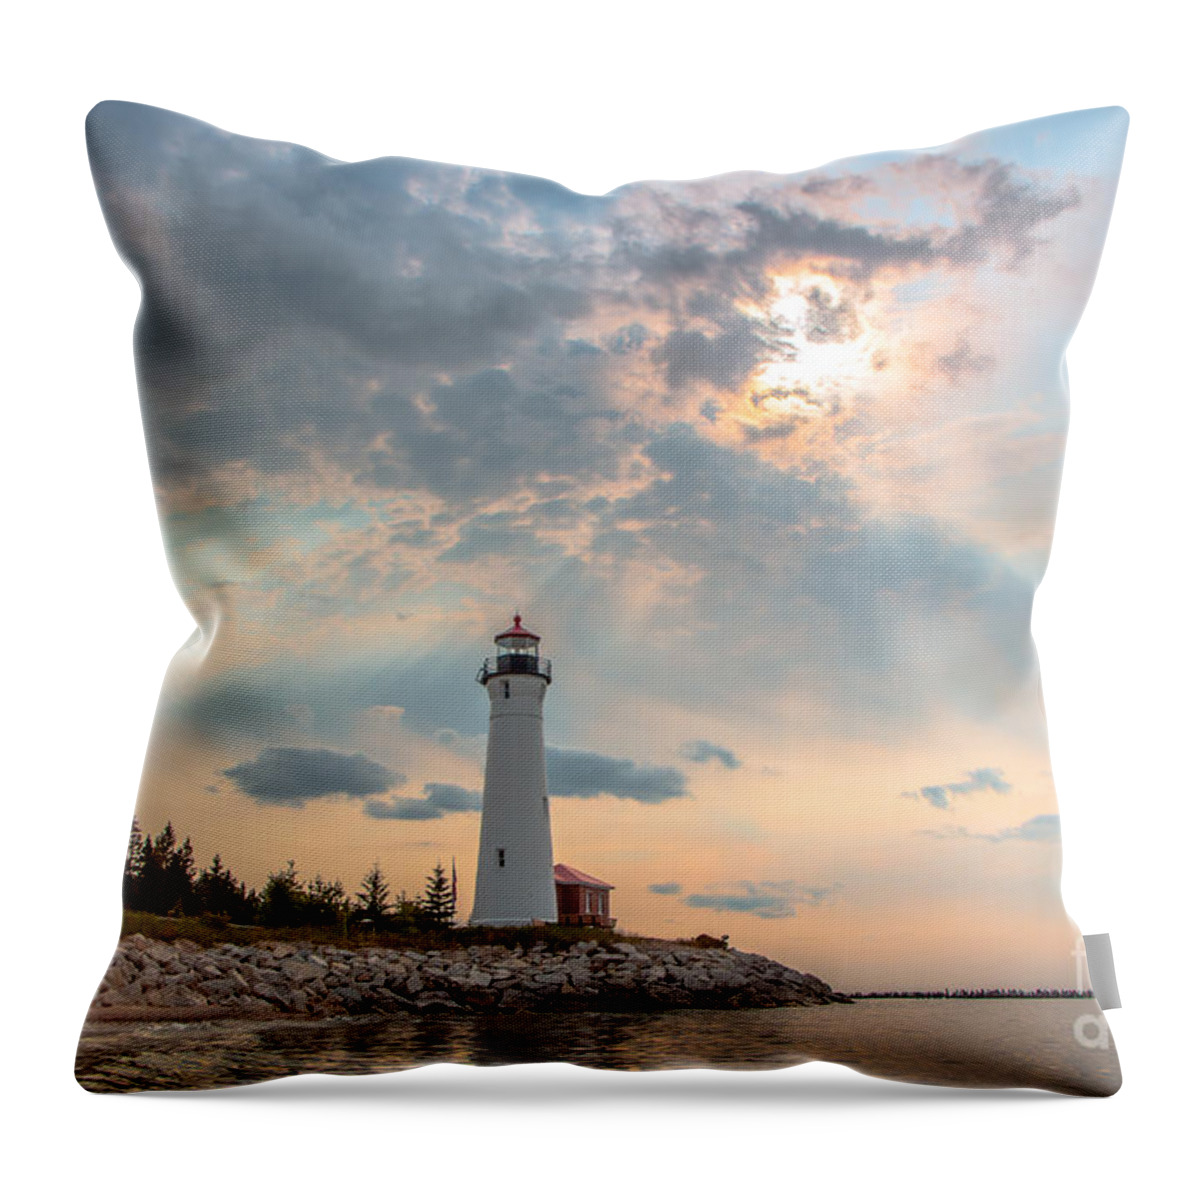 Great Lakes Lighthouses Throw Pillow featuring the photograph An Awe Inspiring Moment At Crisp Point Lighthouse 6970 by Norris Seward